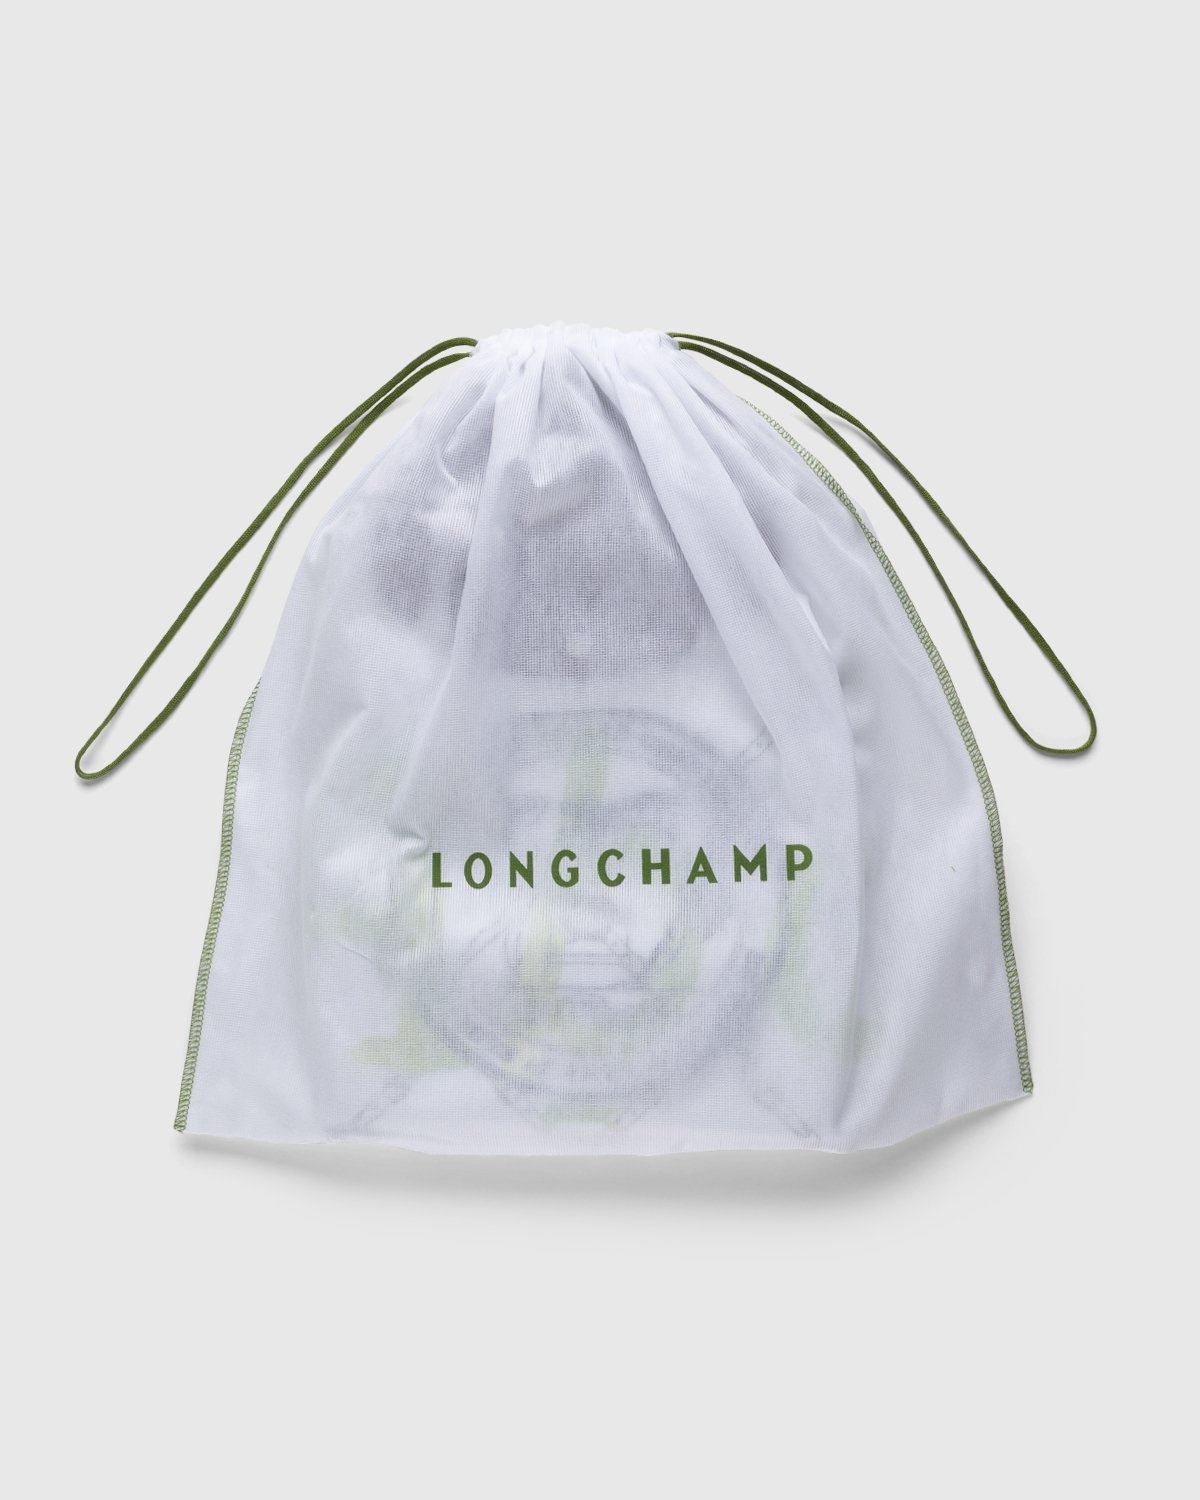 Not In Paris”: Longchamp Collaborates With Highsnobiety - Luxferity Magazine